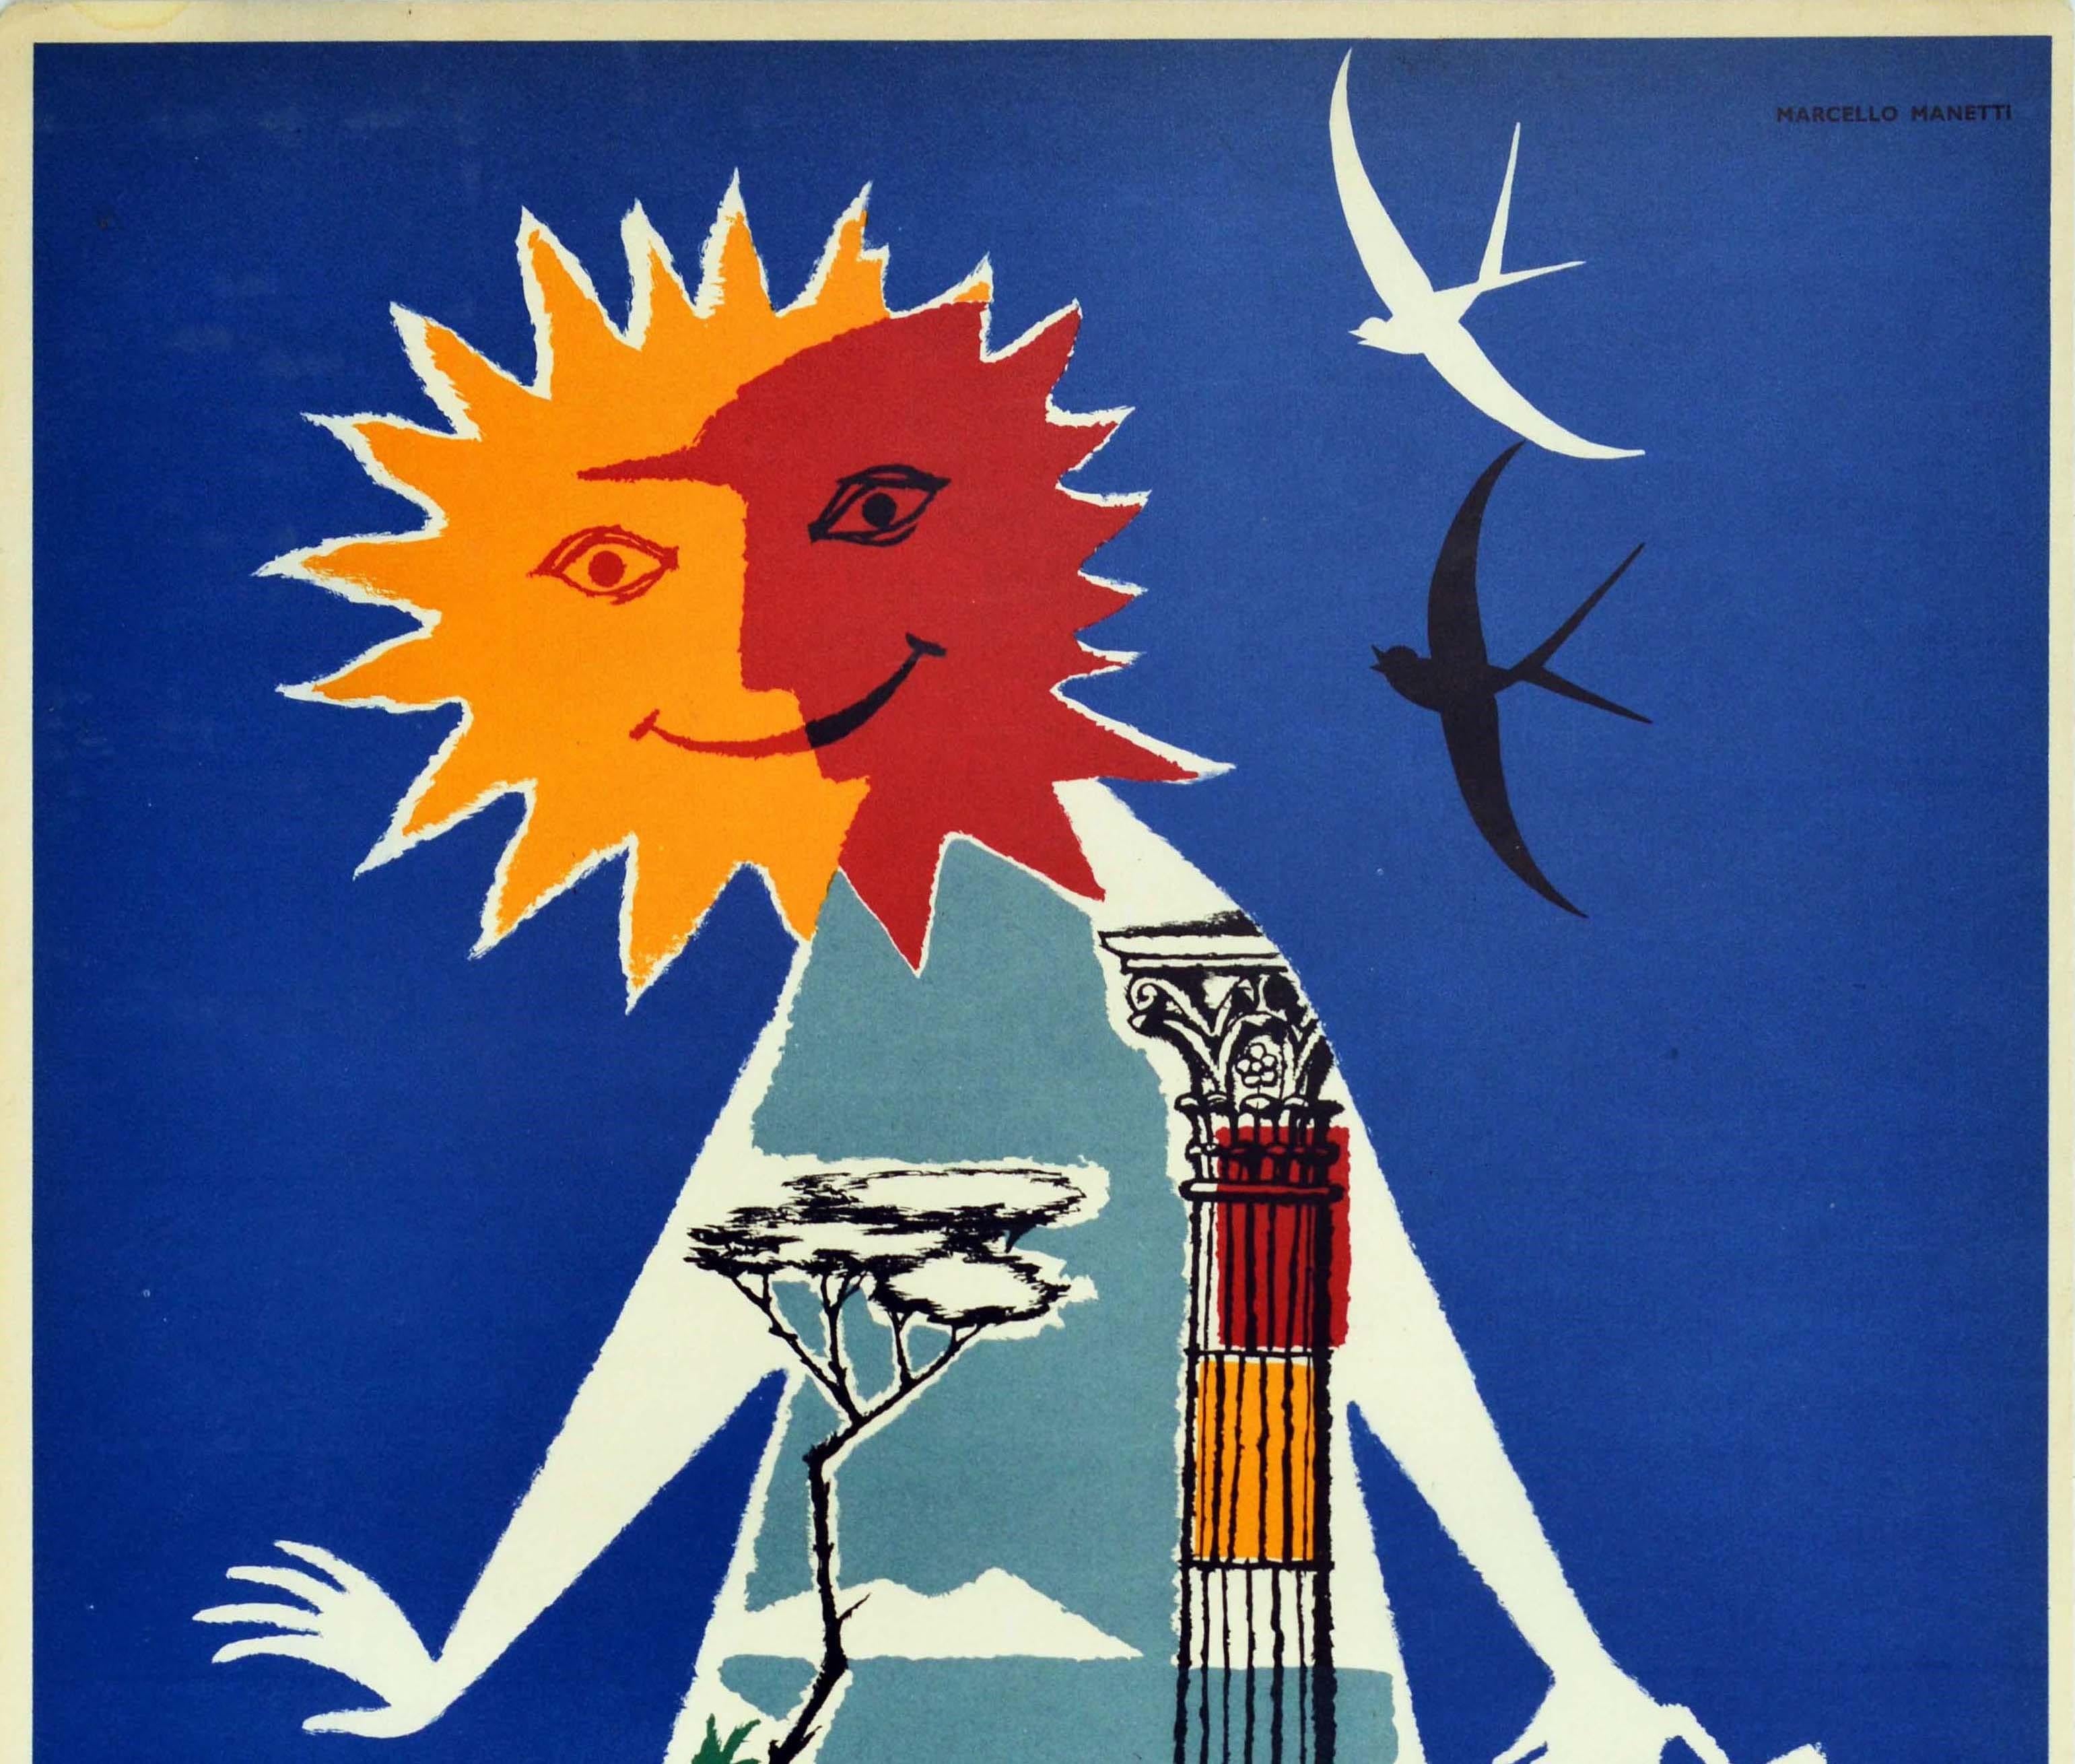 Original vintage travel poster for Italy featuring a colourful stylised mid-century design of the shape of a man walking and holding a suitcase in his hand with a smiling sun over his head as a shadow and drawings of Italy on his body including a